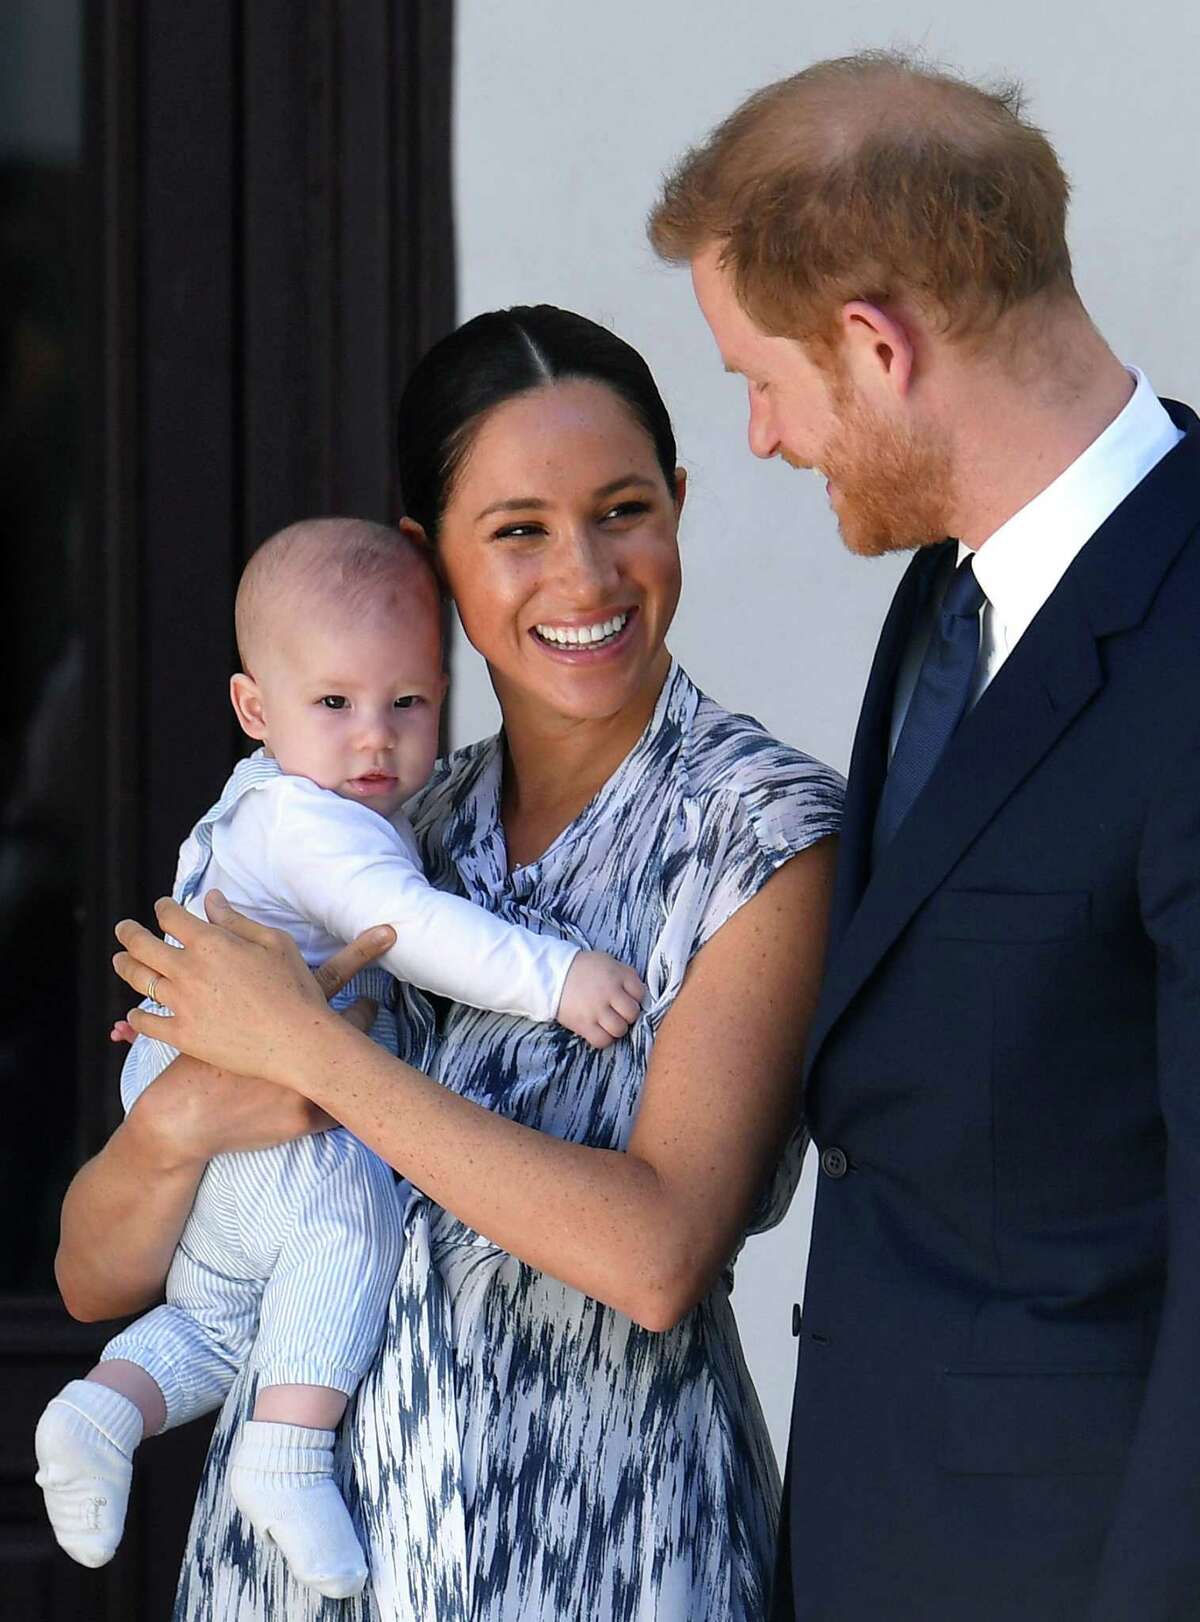 Harry, Meghan and Archie Get a New Home : A spokesman for the Sussexes confirmed that they have bought a Santa Barbara property and "settled" into the community.